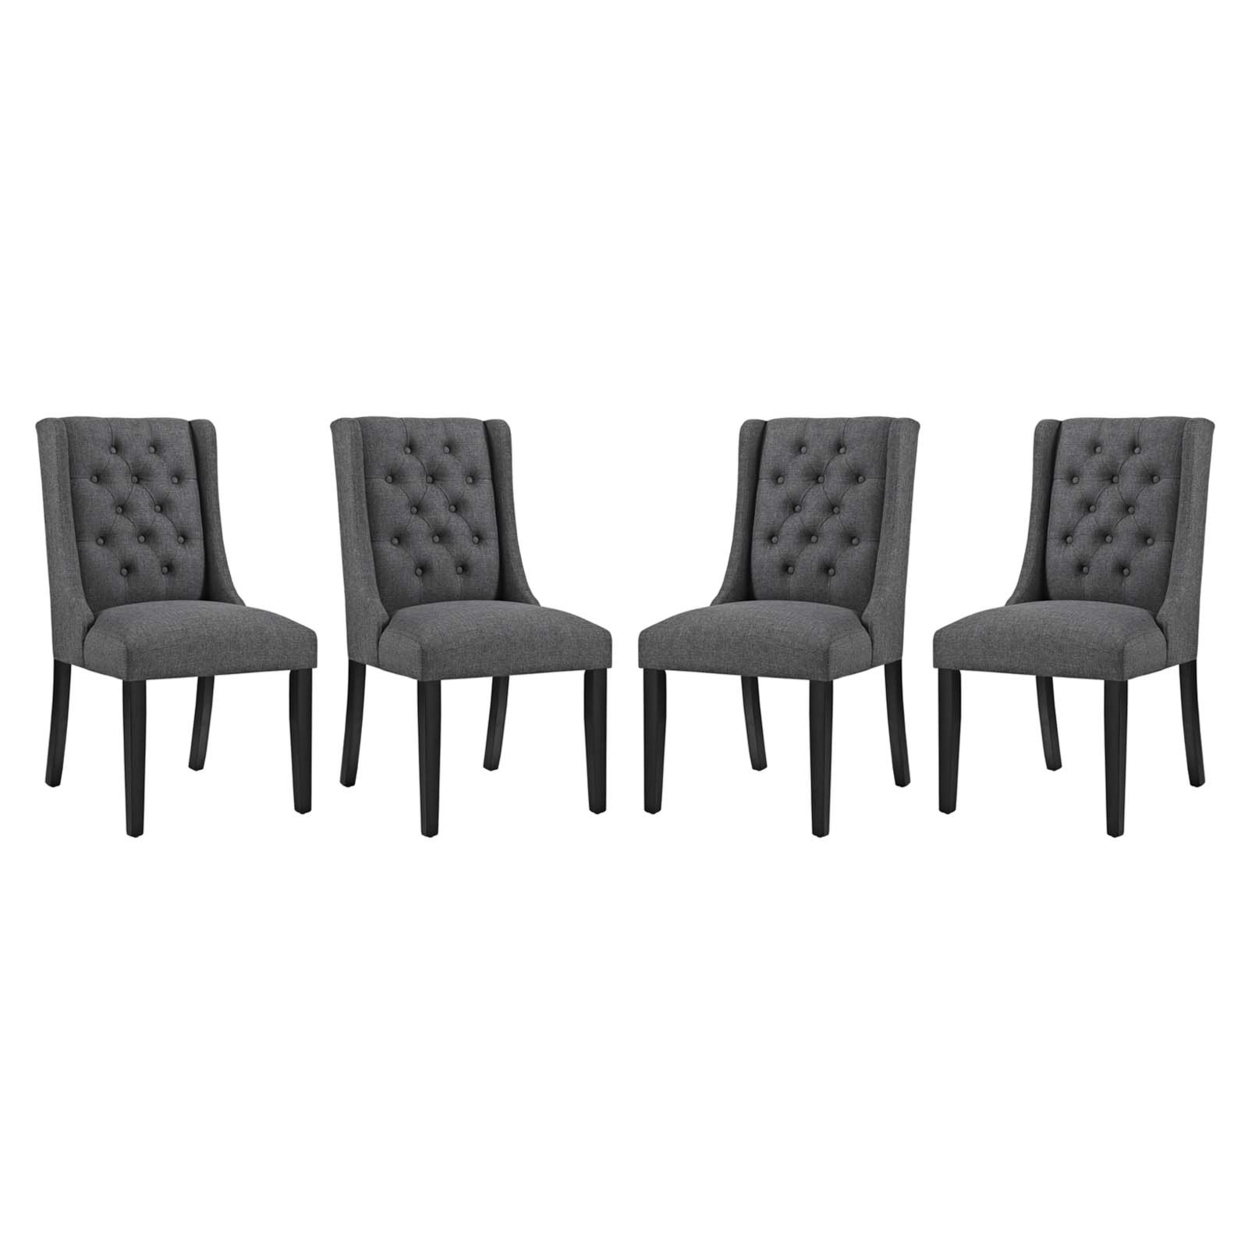 Baronet Dining Chair Fabric Set Of 4, Gray